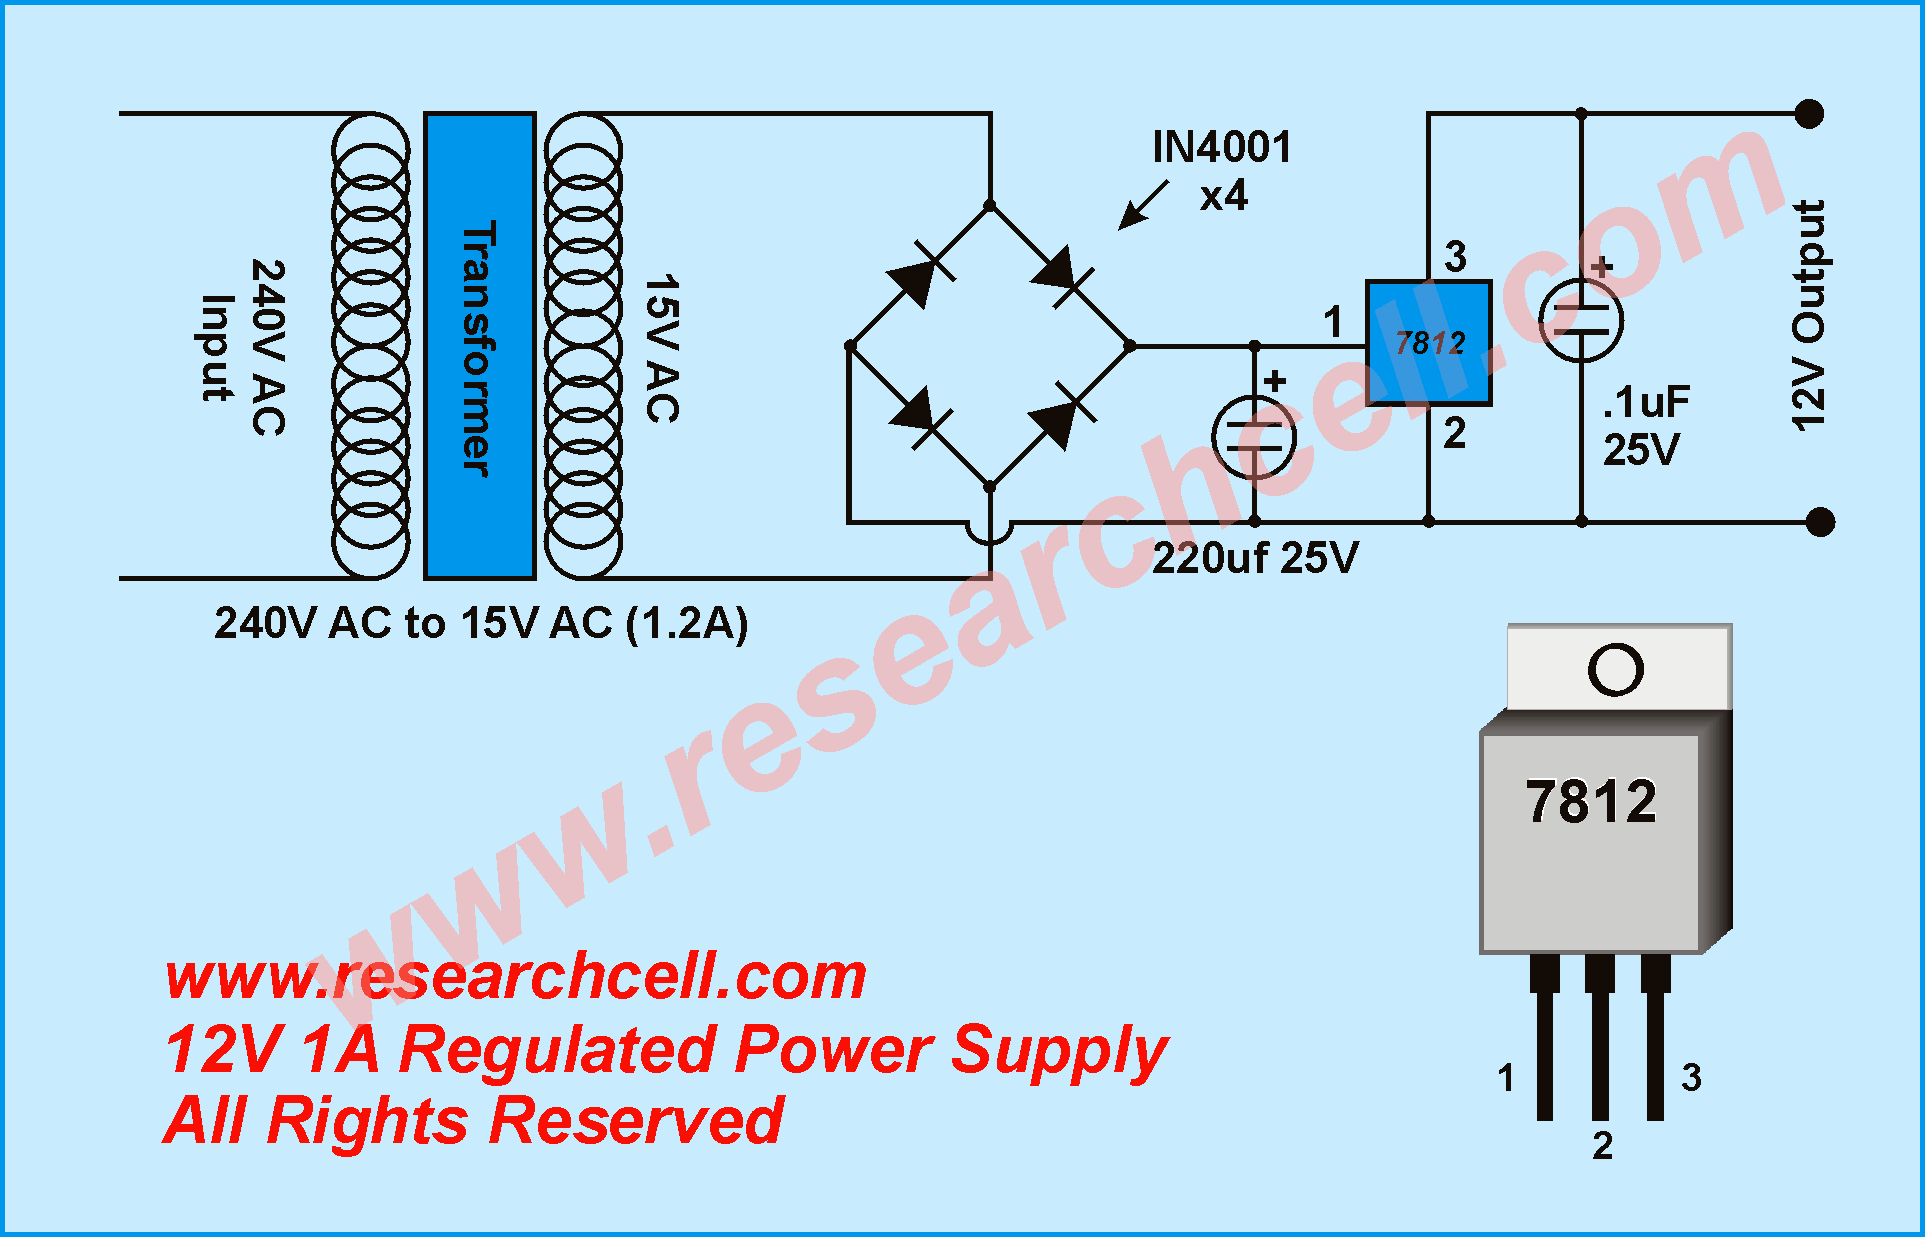 Power Supply Drawing at GetDrawings | Free download